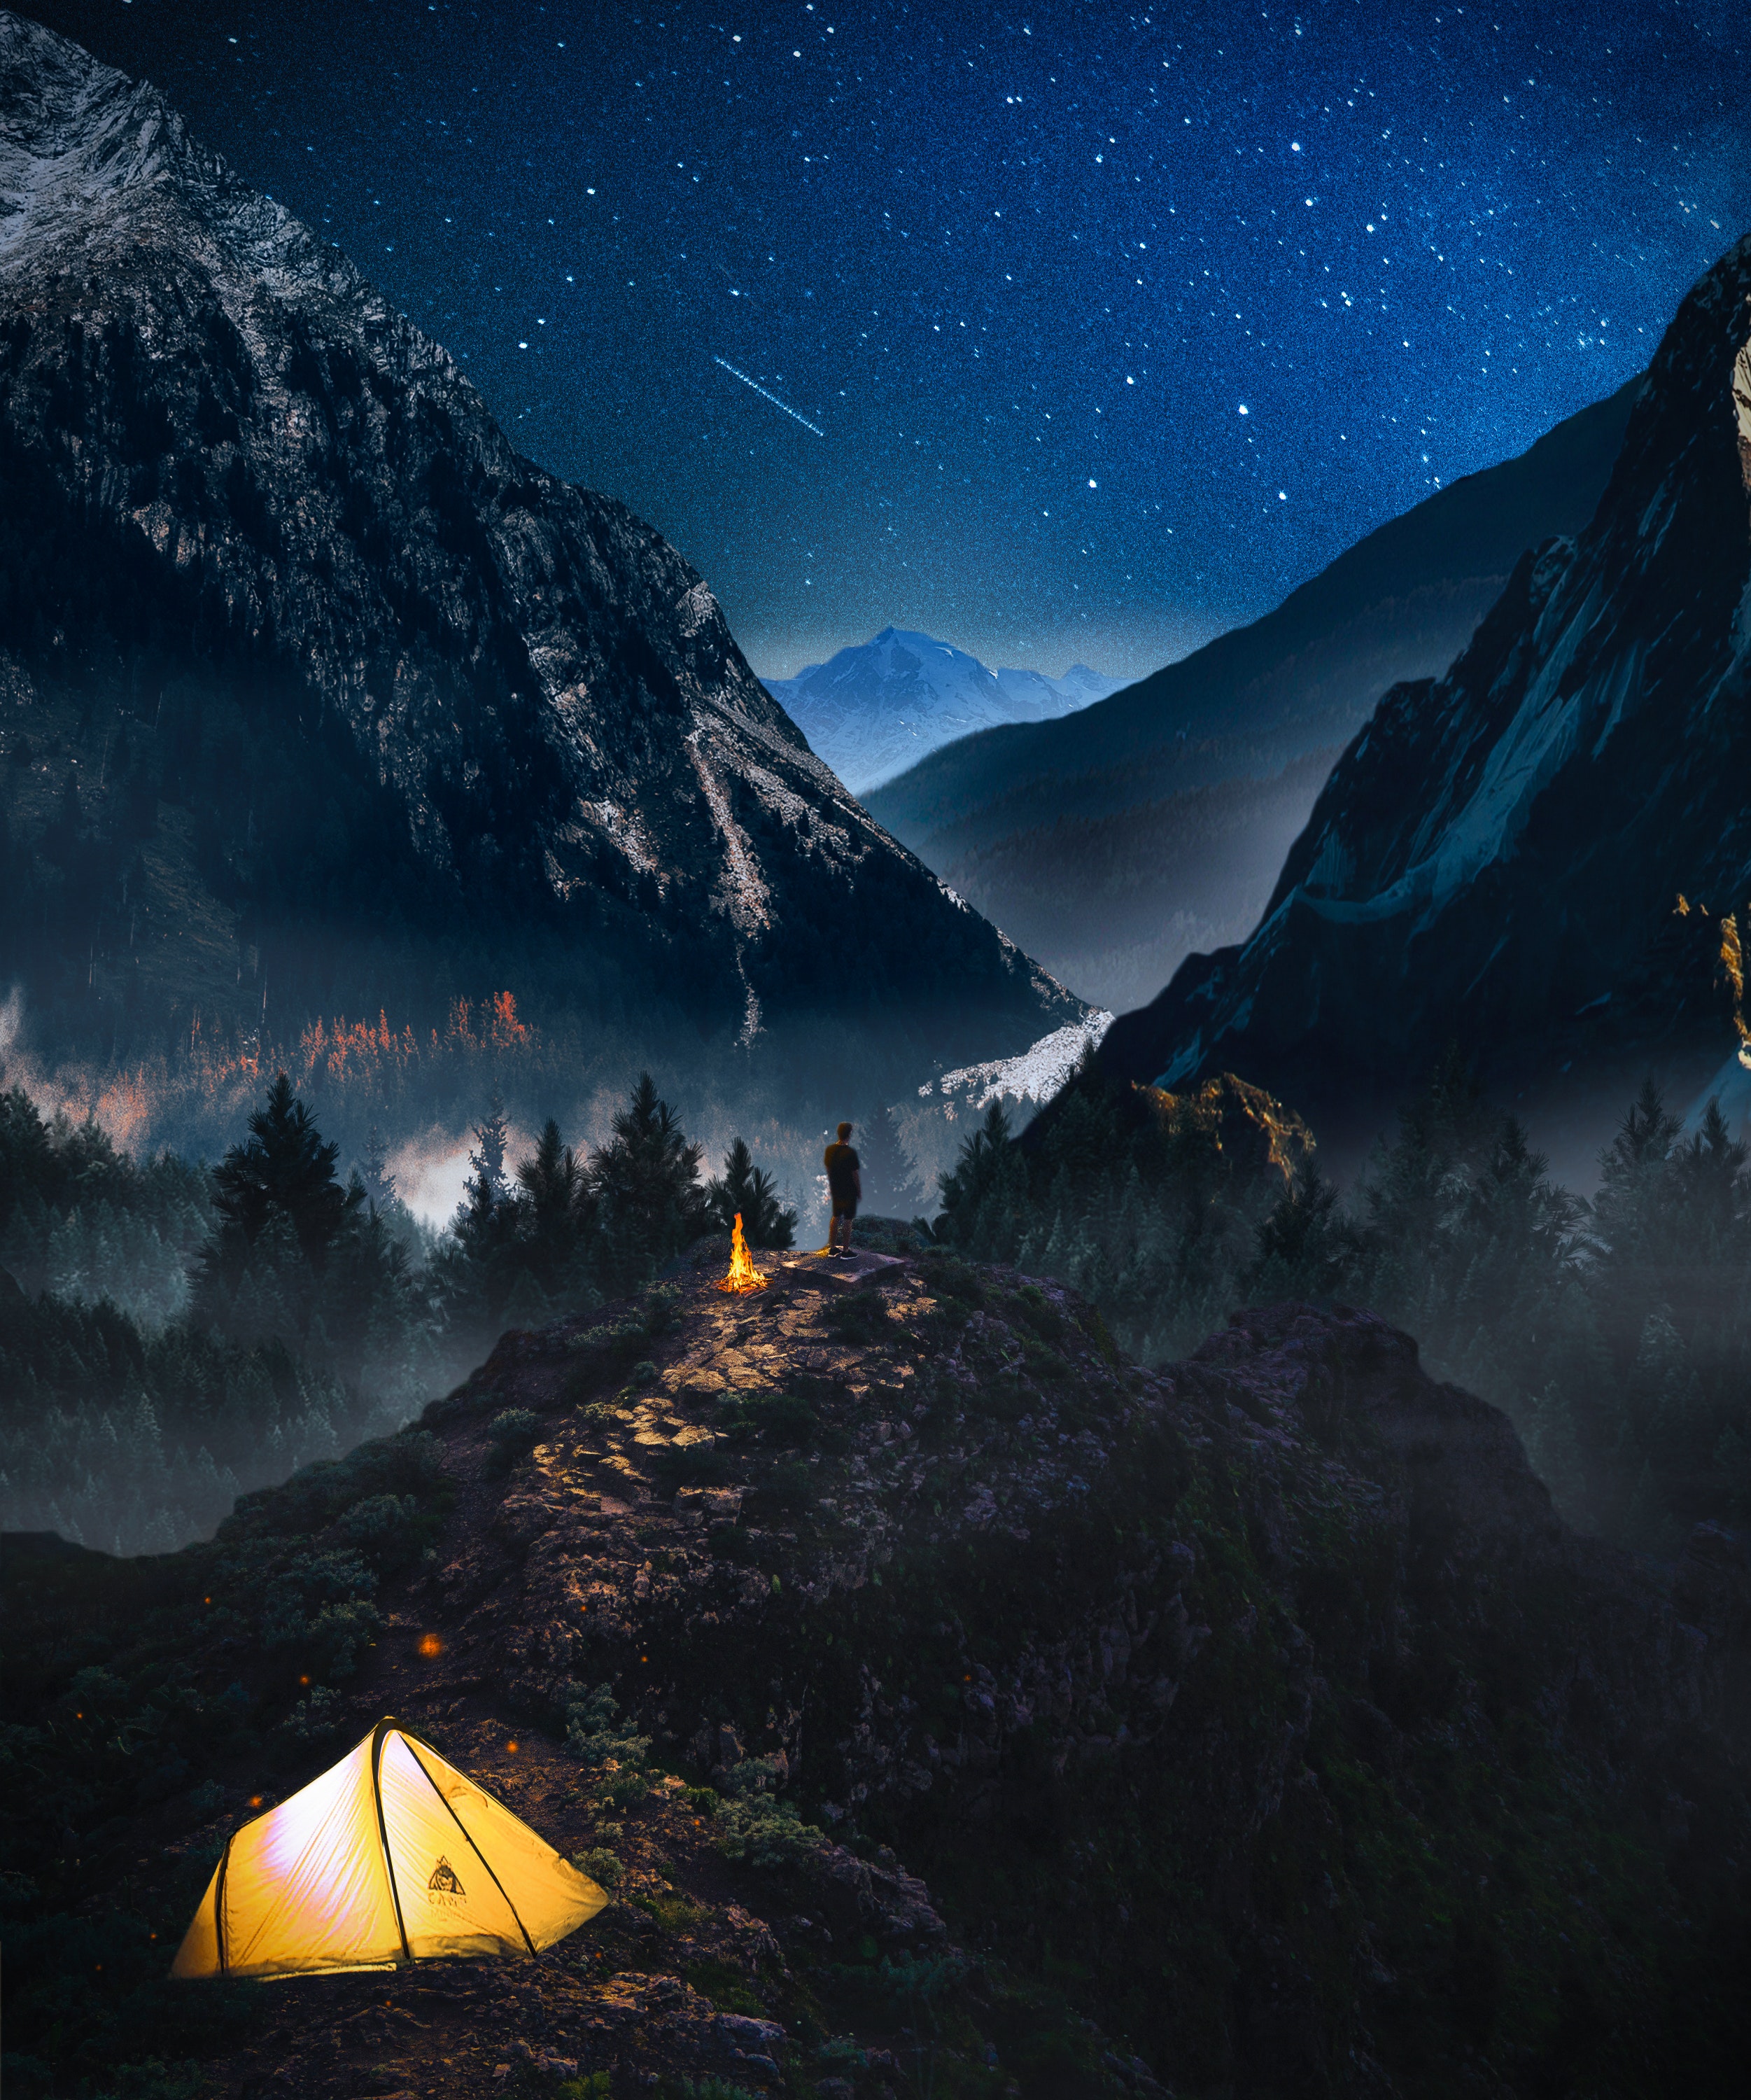 starry sky, camping, loneliness, photoshop, campsite, mountains, nature 8K